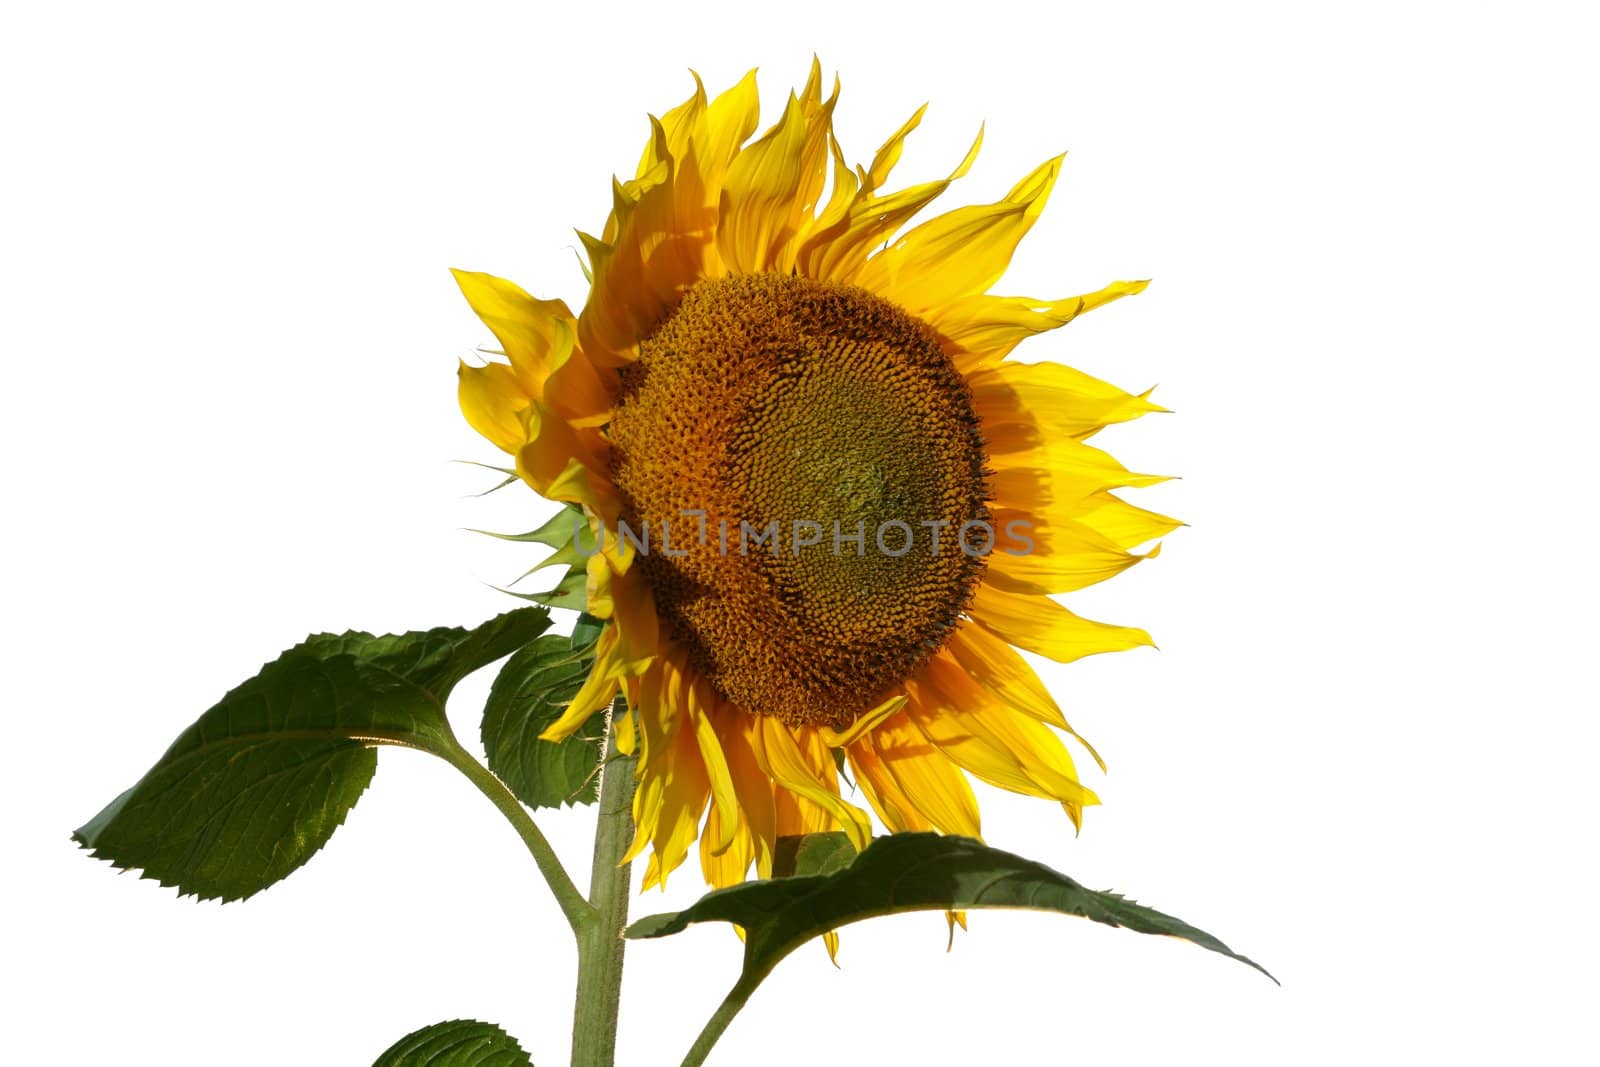 An image of sunflower. Isolated on white.